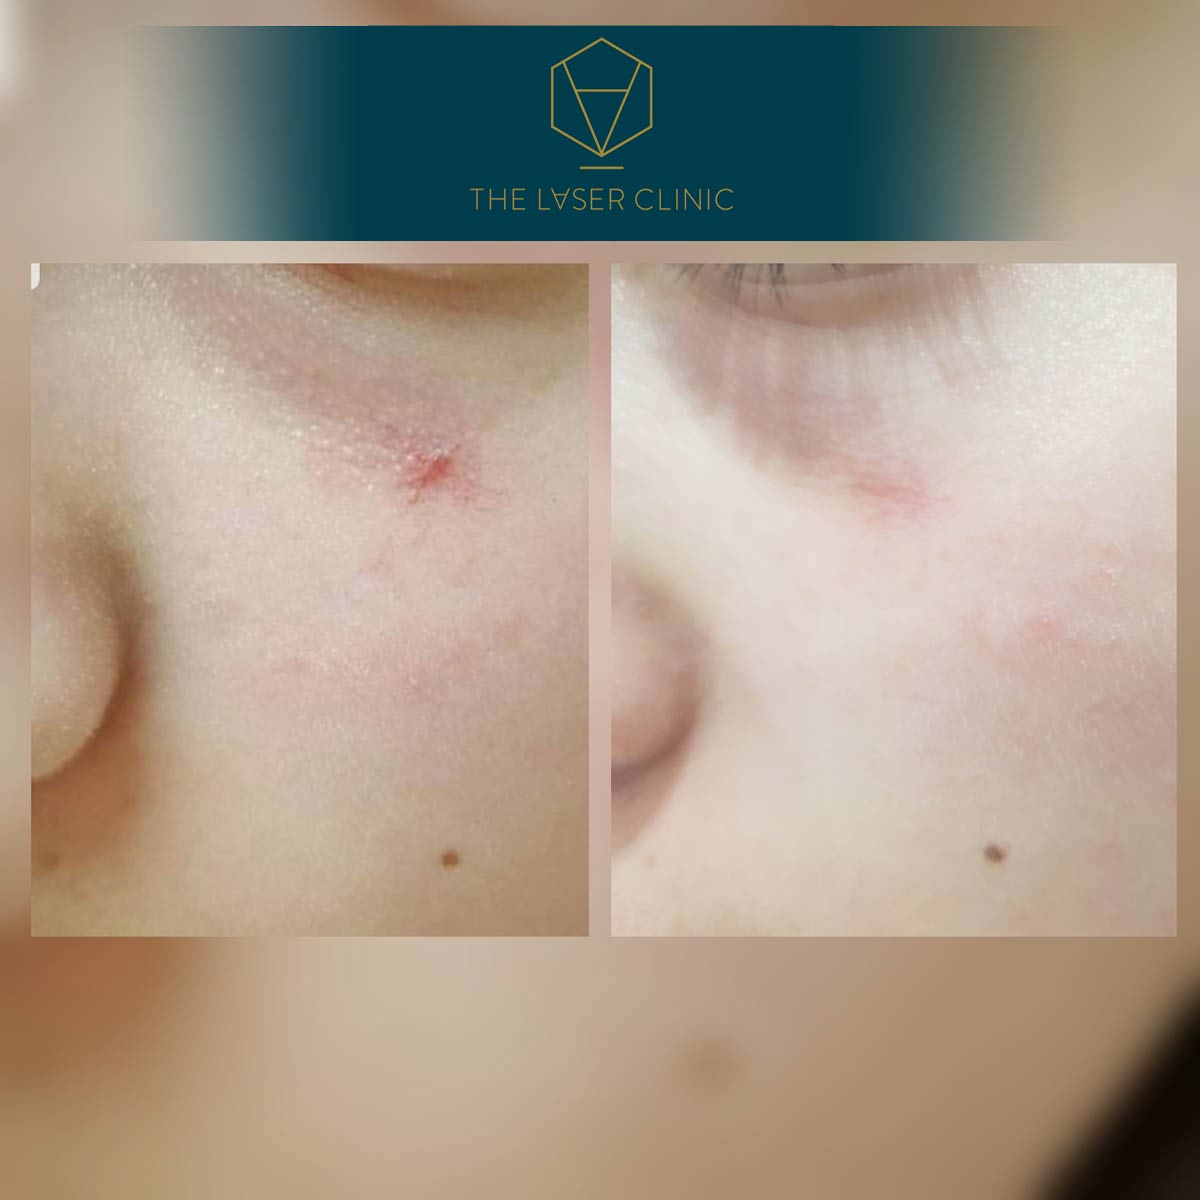 Pigmented Lesions - The Laser Clinic Exmouth